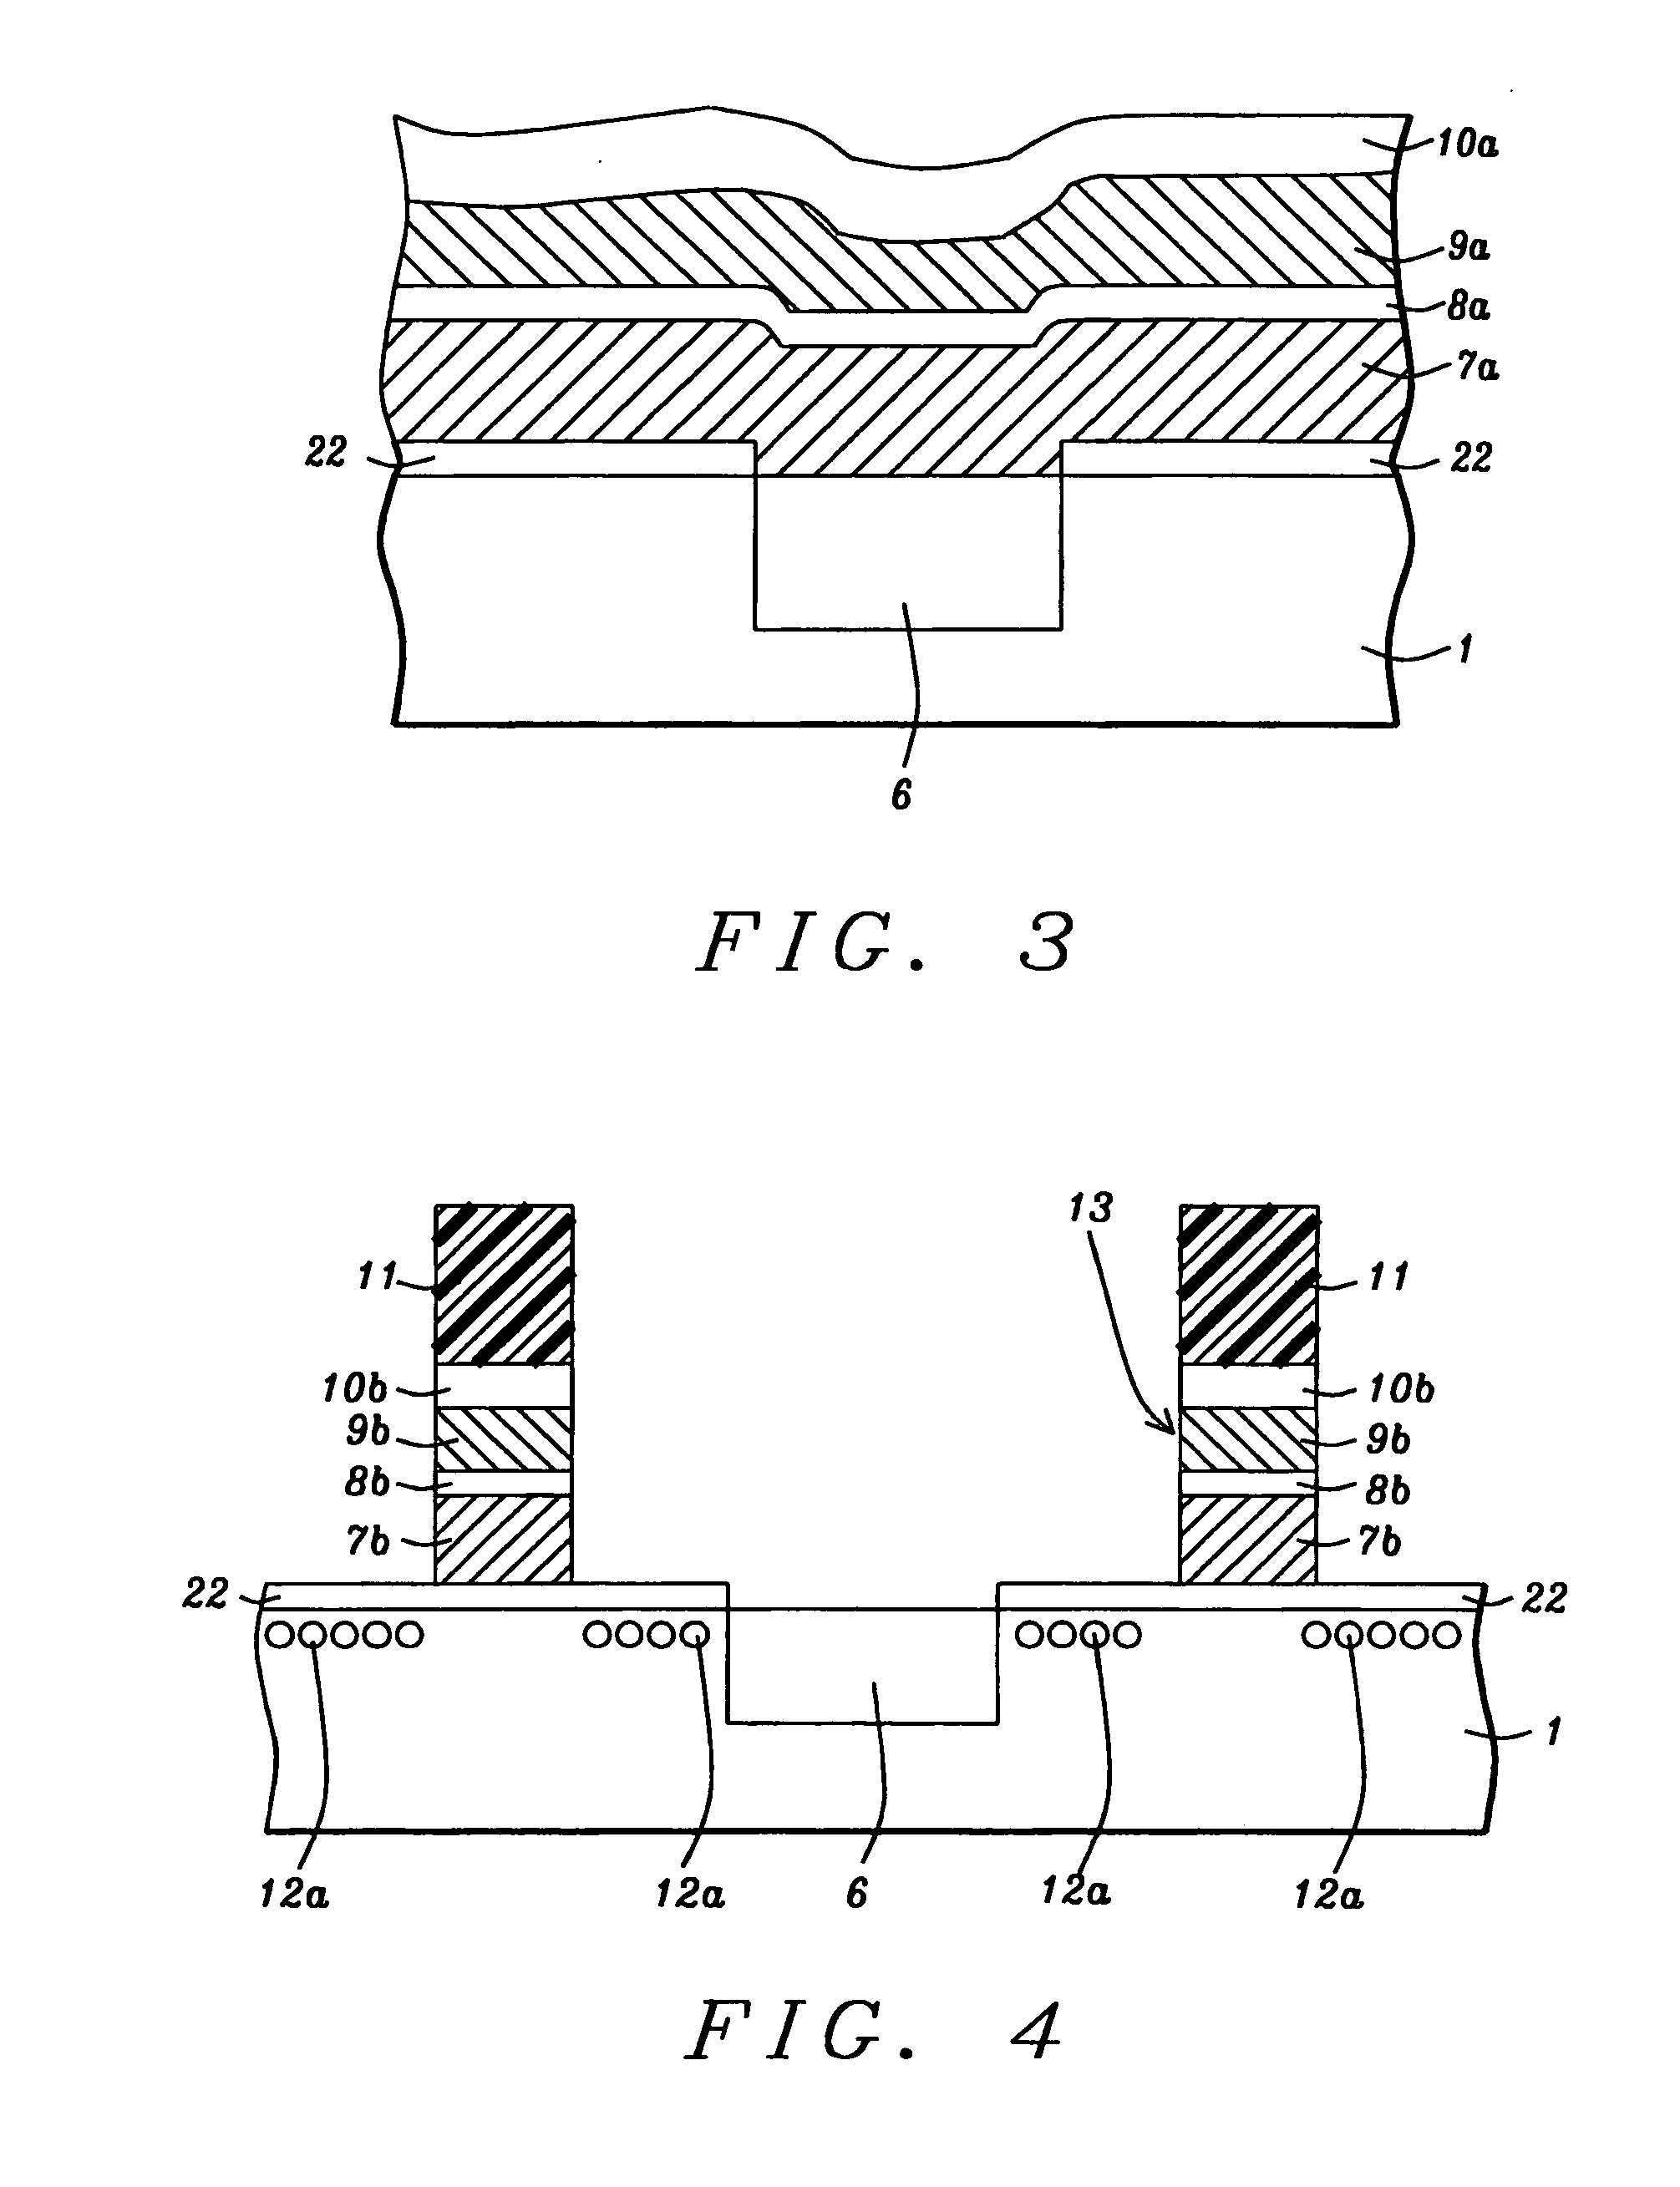 Method for passivation of plasma etch defects in DRAM devices